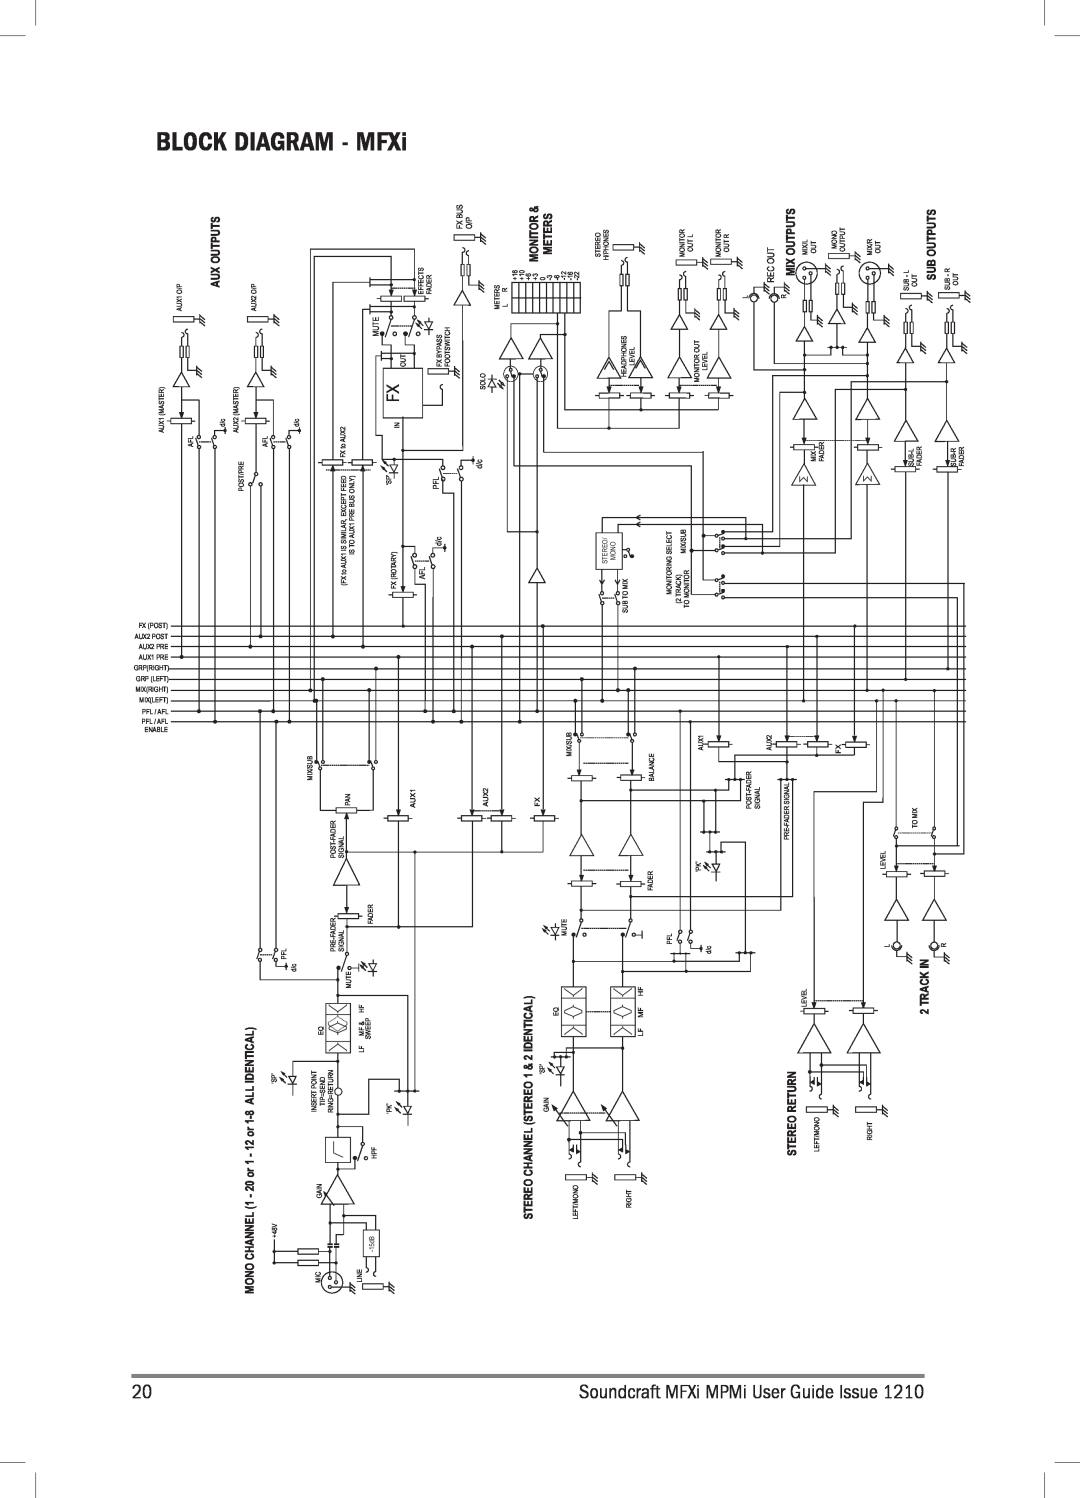 Harman MPMI, MFXI BLOCK DIAGRAM - MFXi, Aux Outputs, STEREO CHANNEL STEREO 1 & 2 IDENTICAL, Monitor, Meters, Stereo Return 